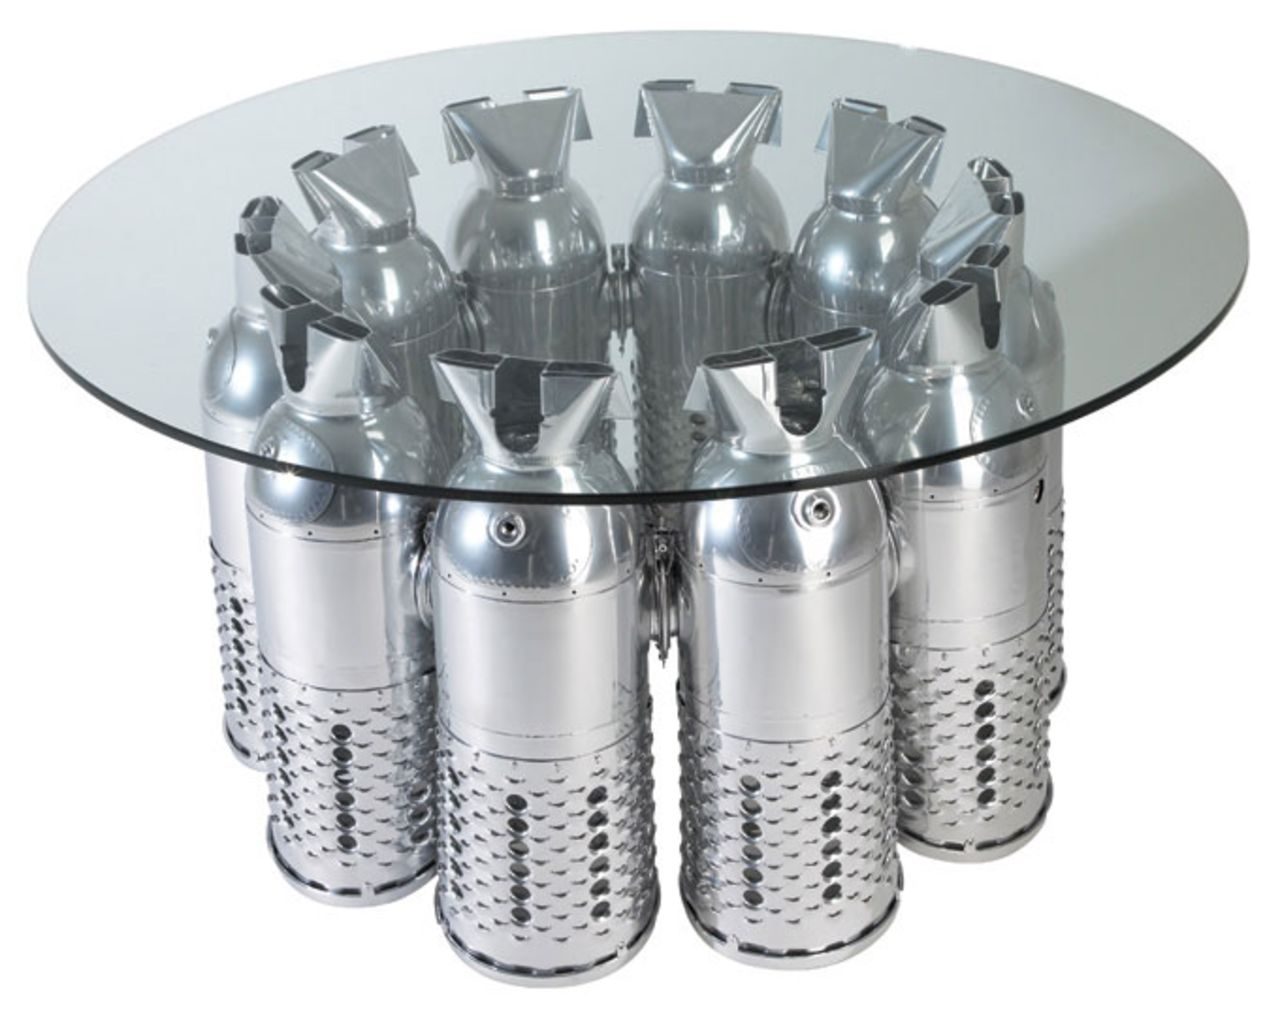 Magic Mike would love this MotoArt coffee table. It comes with a fancy name -- the F-4 Phantom -- and includes 10 burner cans with red LED internal illumination for mood lighting. 